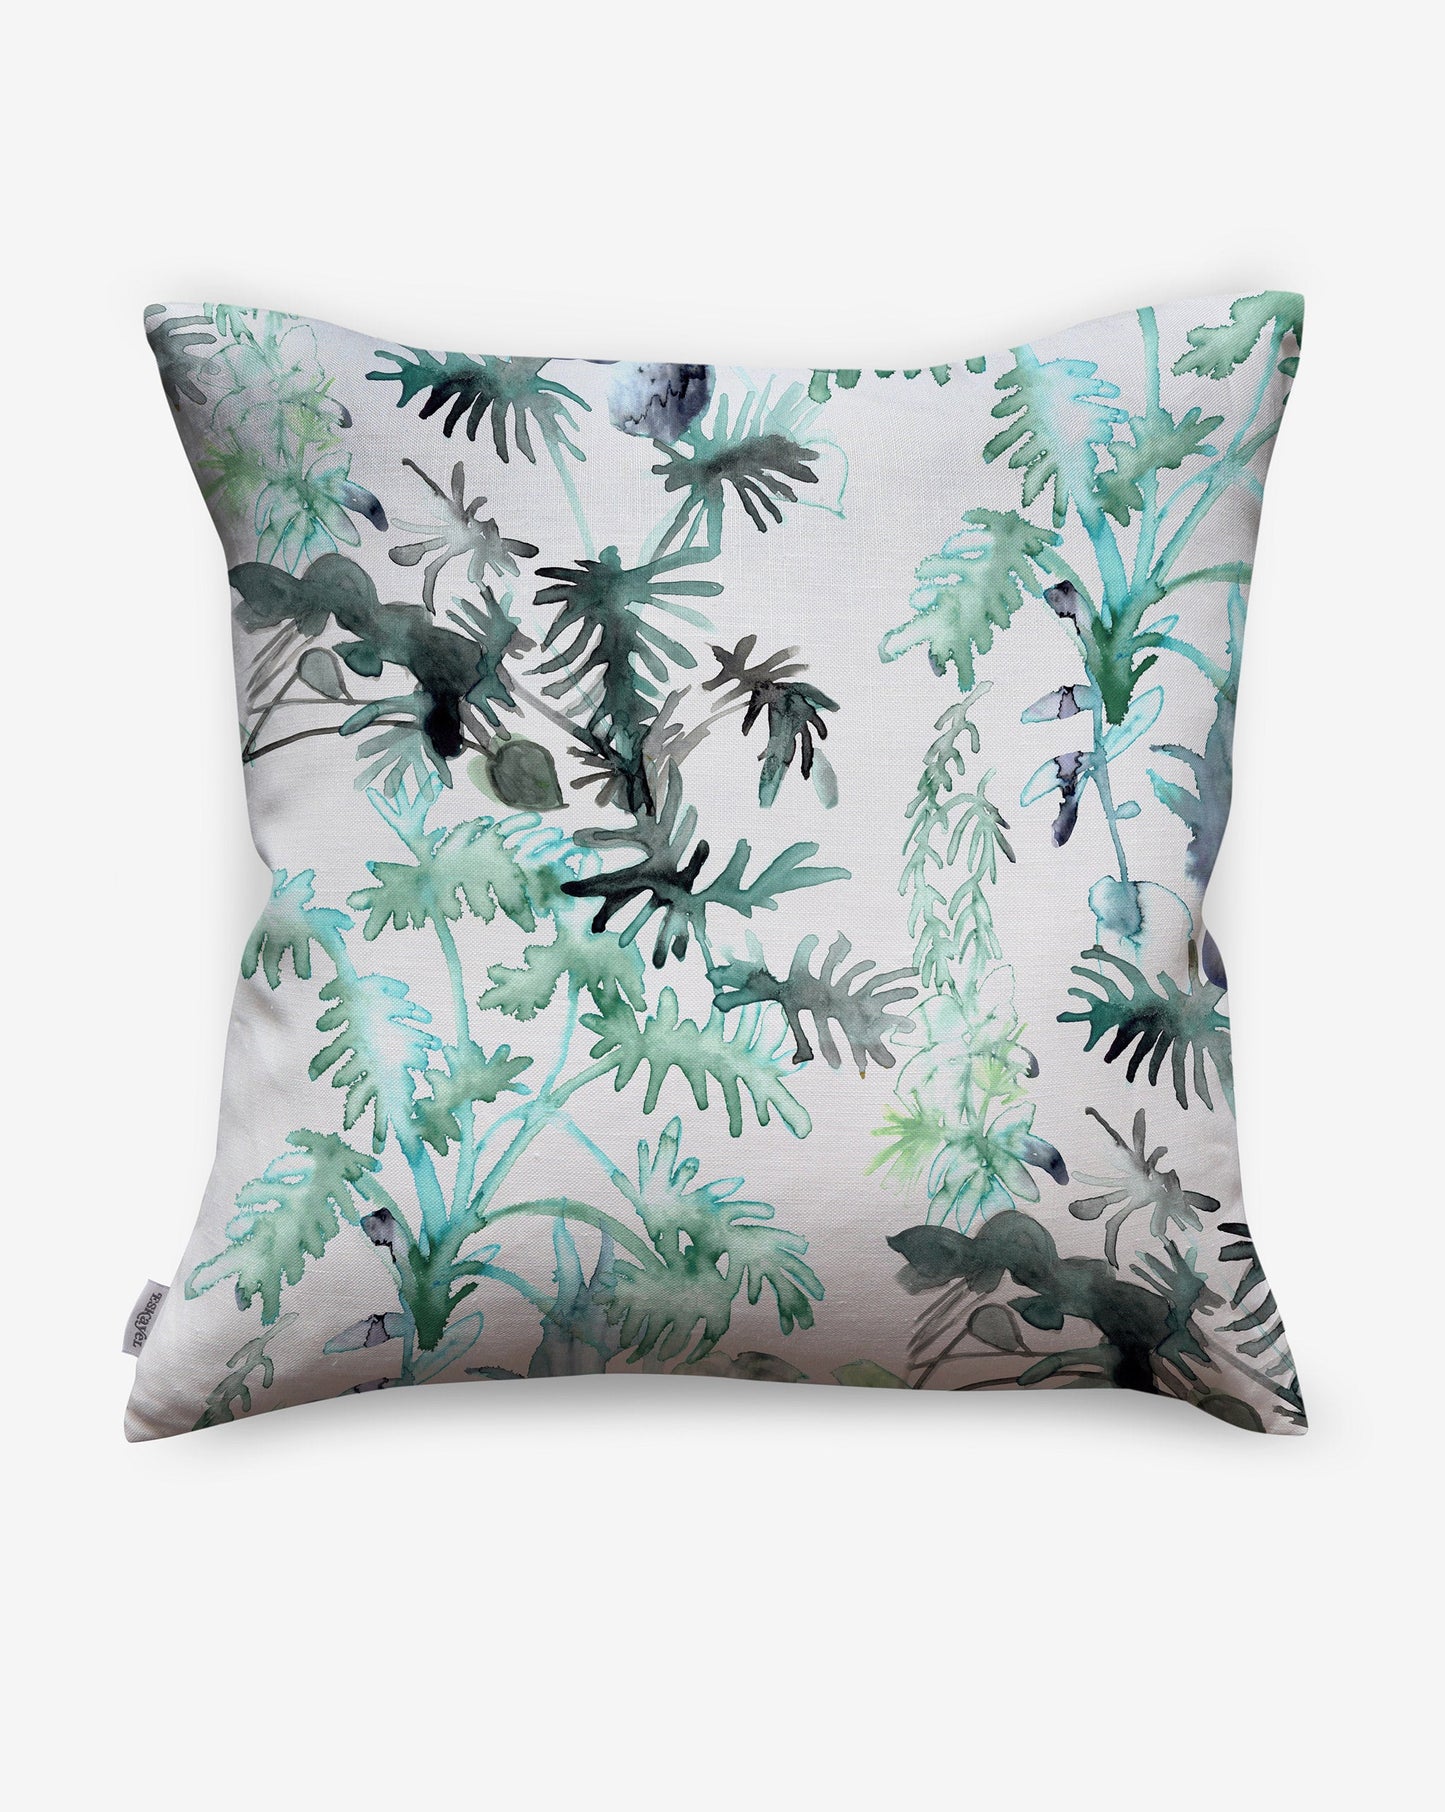 Topiary custom pillows in Spruce display silhouettes of houseplants in turquoise, blue, and green.